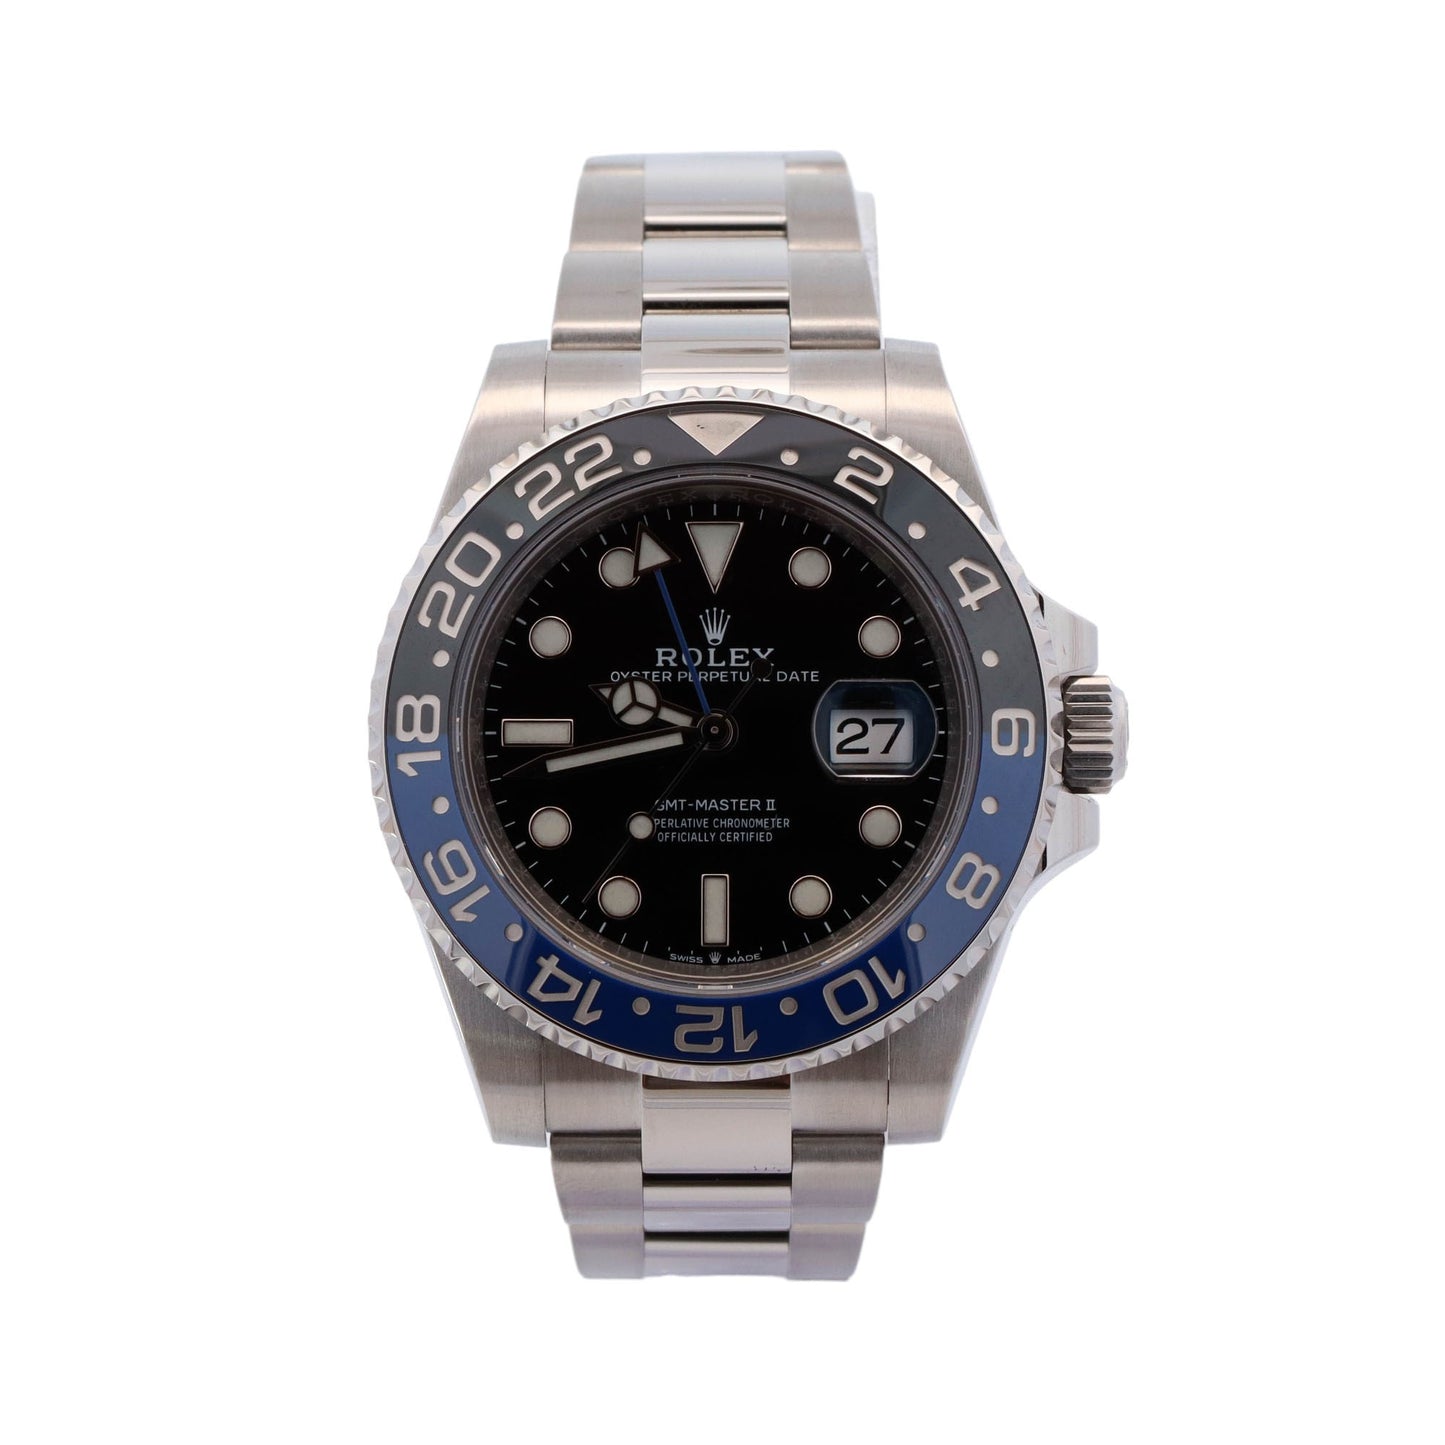 Rolex GMT Master II "Batman" Stainless Steel 40mm Black Dot Dial Watch Reference #: 126710BLNR